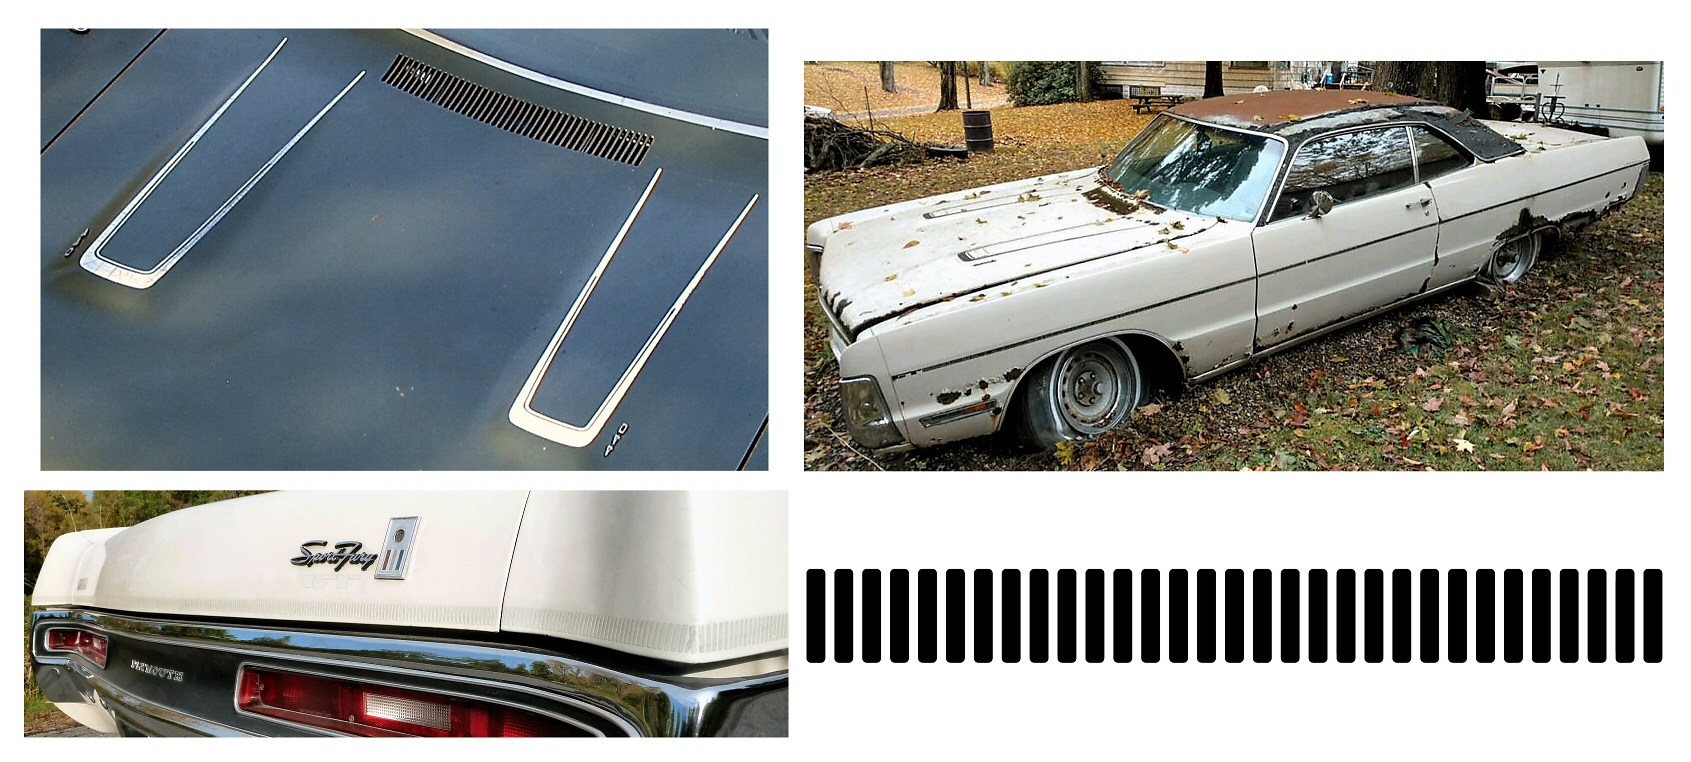 1970 Plymouth Fury S/23, GT Stripes/Strobes